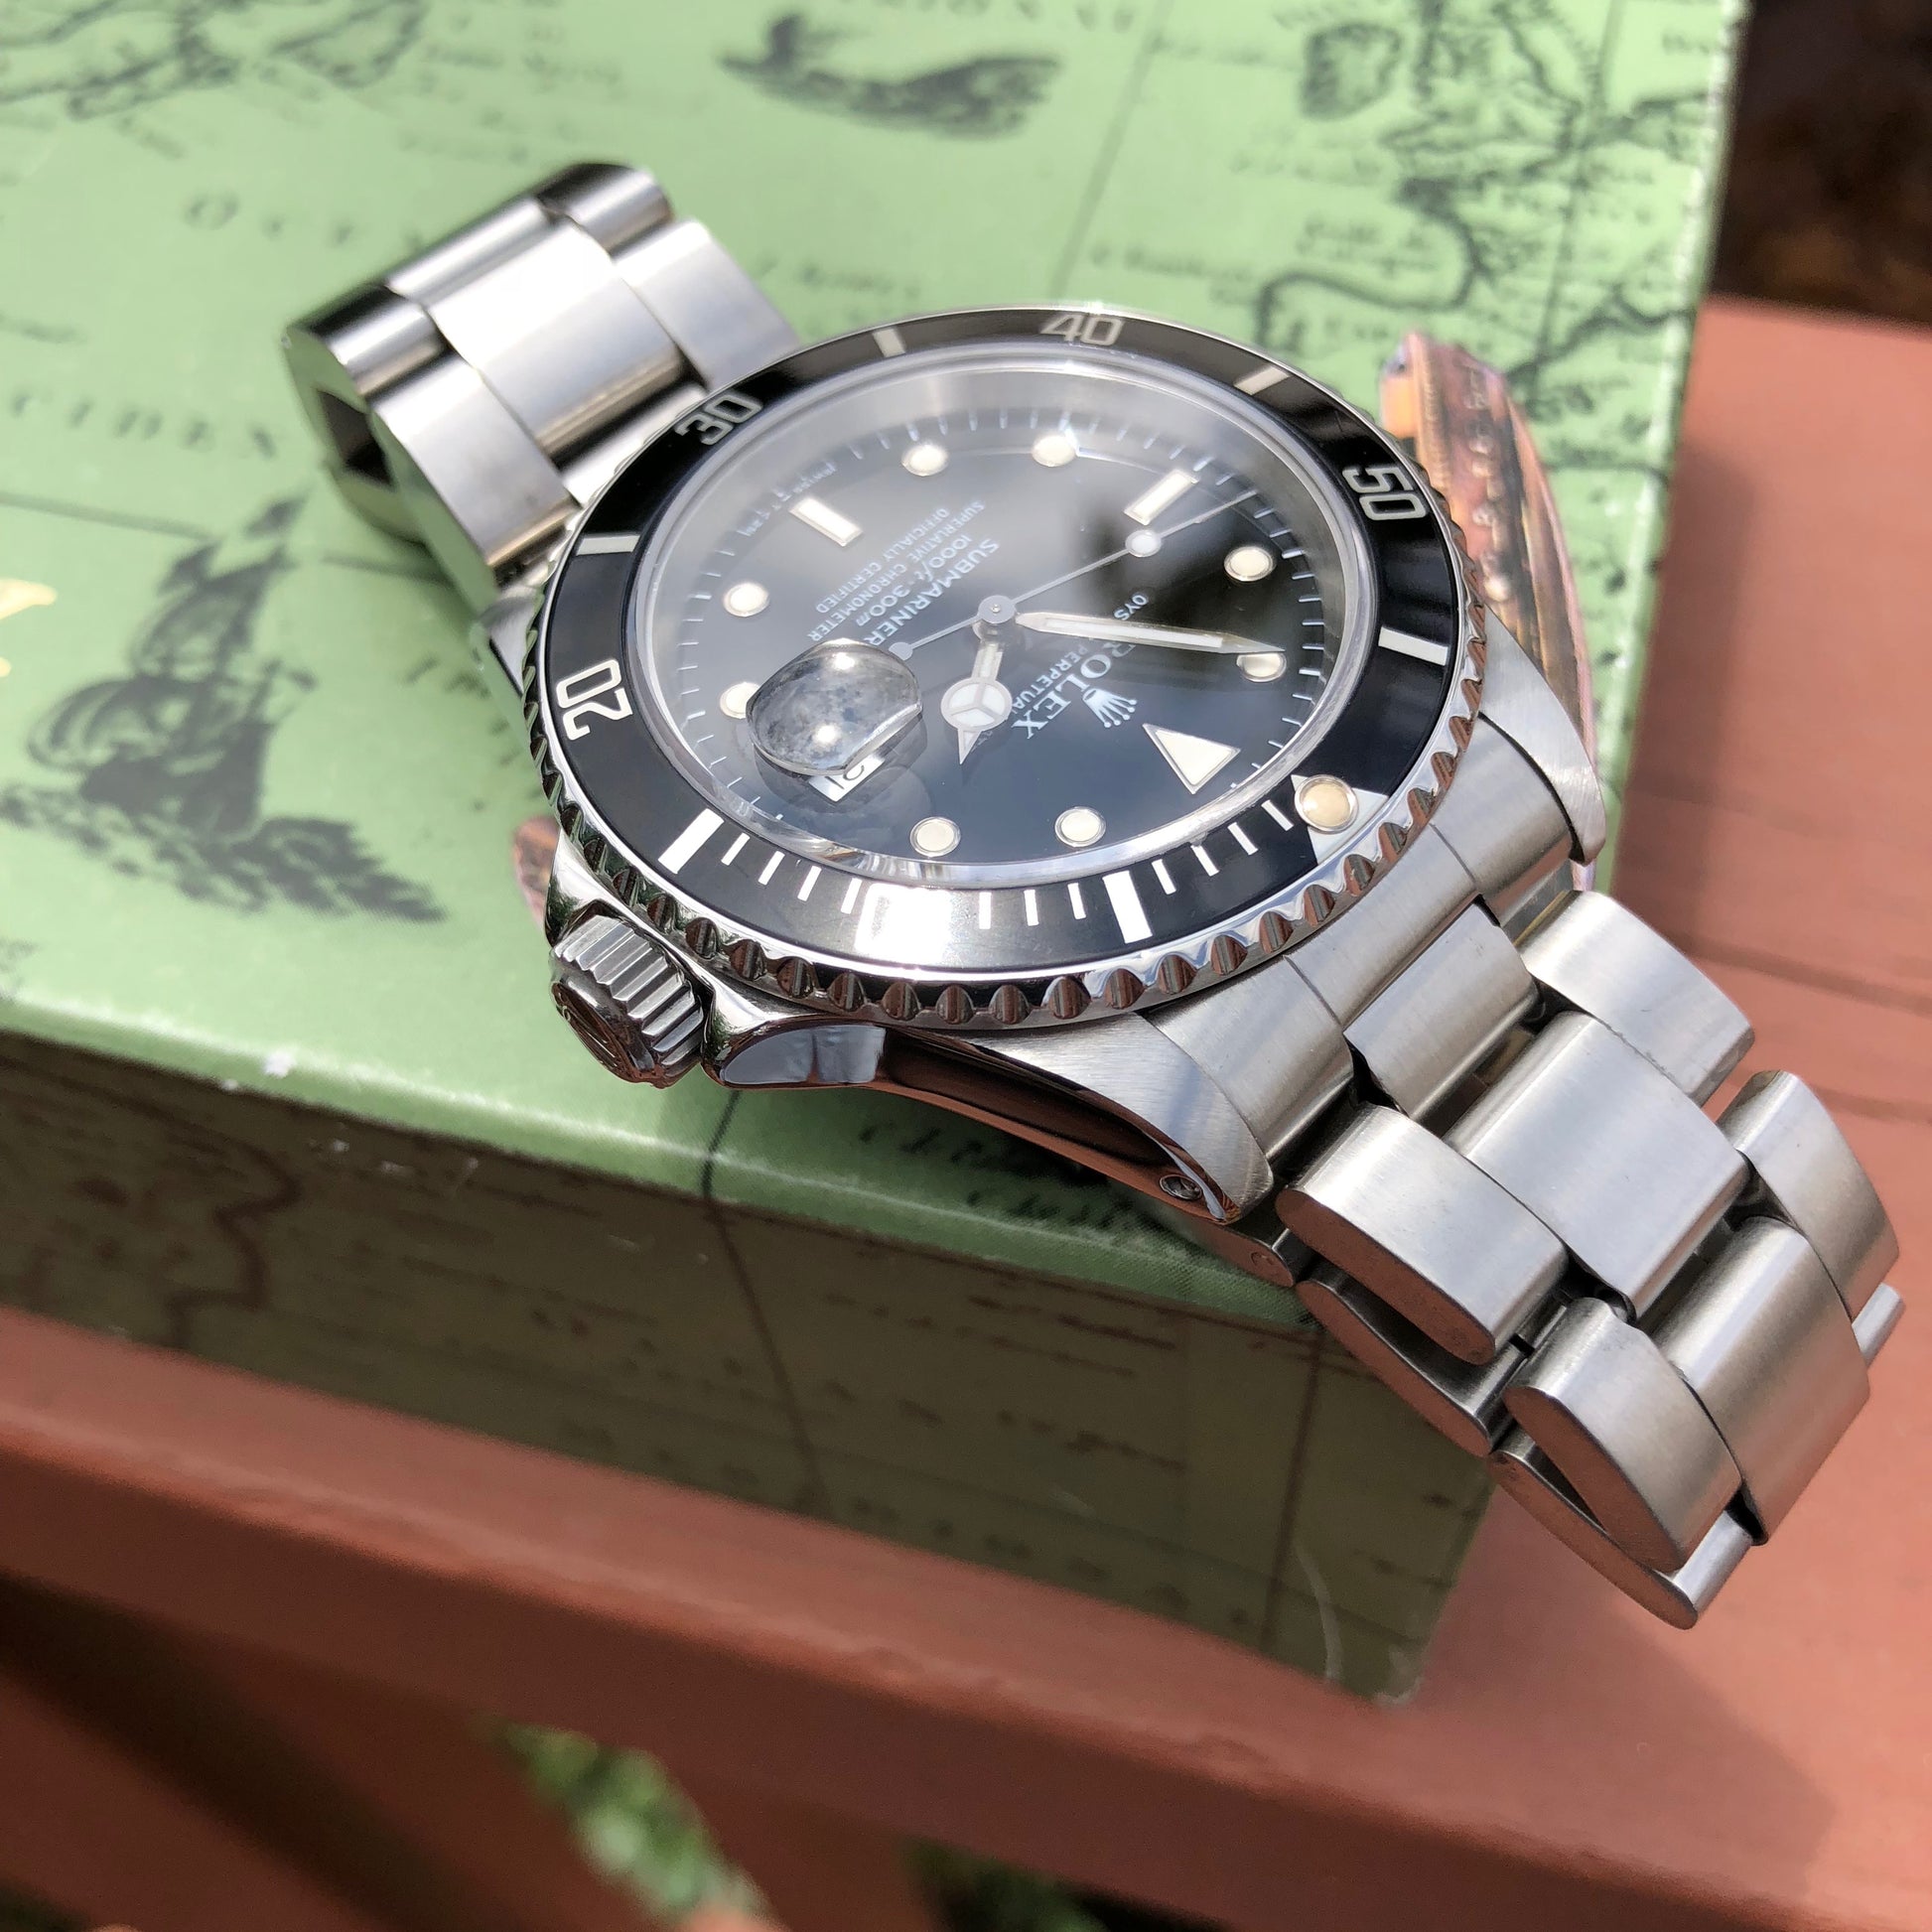 Rolex Submariner 16610 Date Stainless Steel Automatic Cal. 3135 Box & Papers Circa 1989 - Hashtag Watch Company